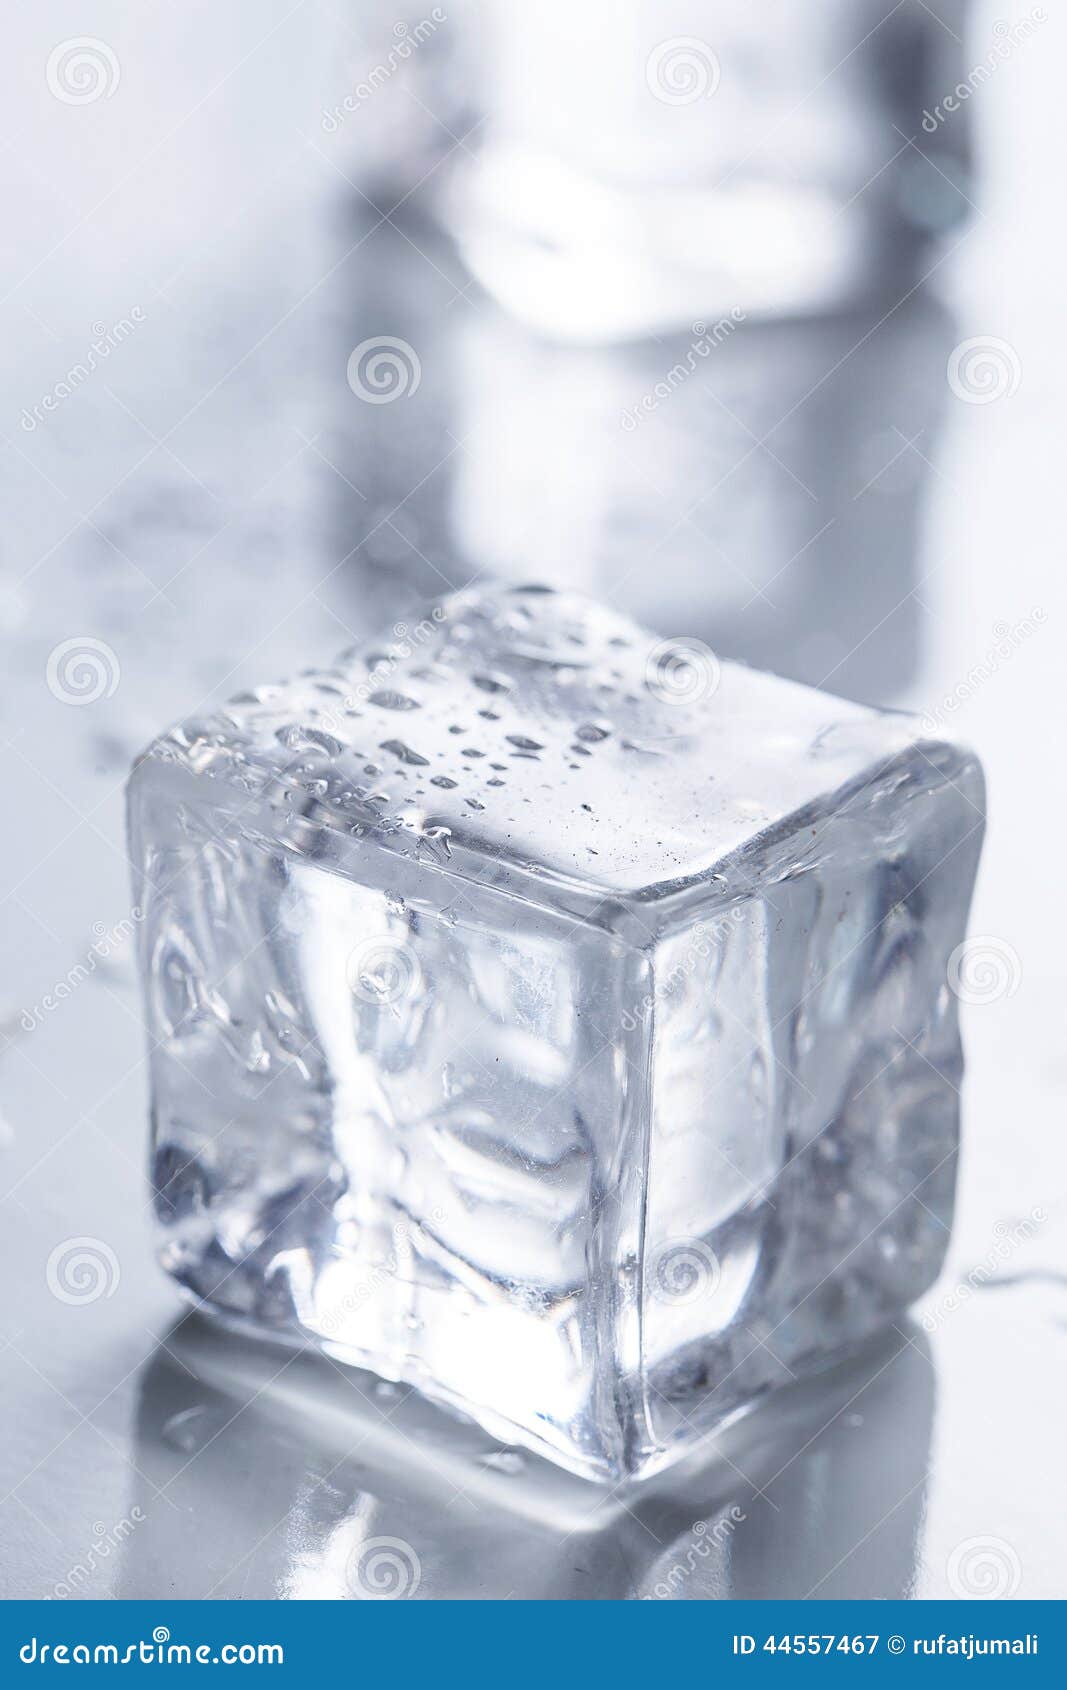 https://thumbs.dreamstime.com/z/ice-cubes-table-cold-frozen-44557467.jpg